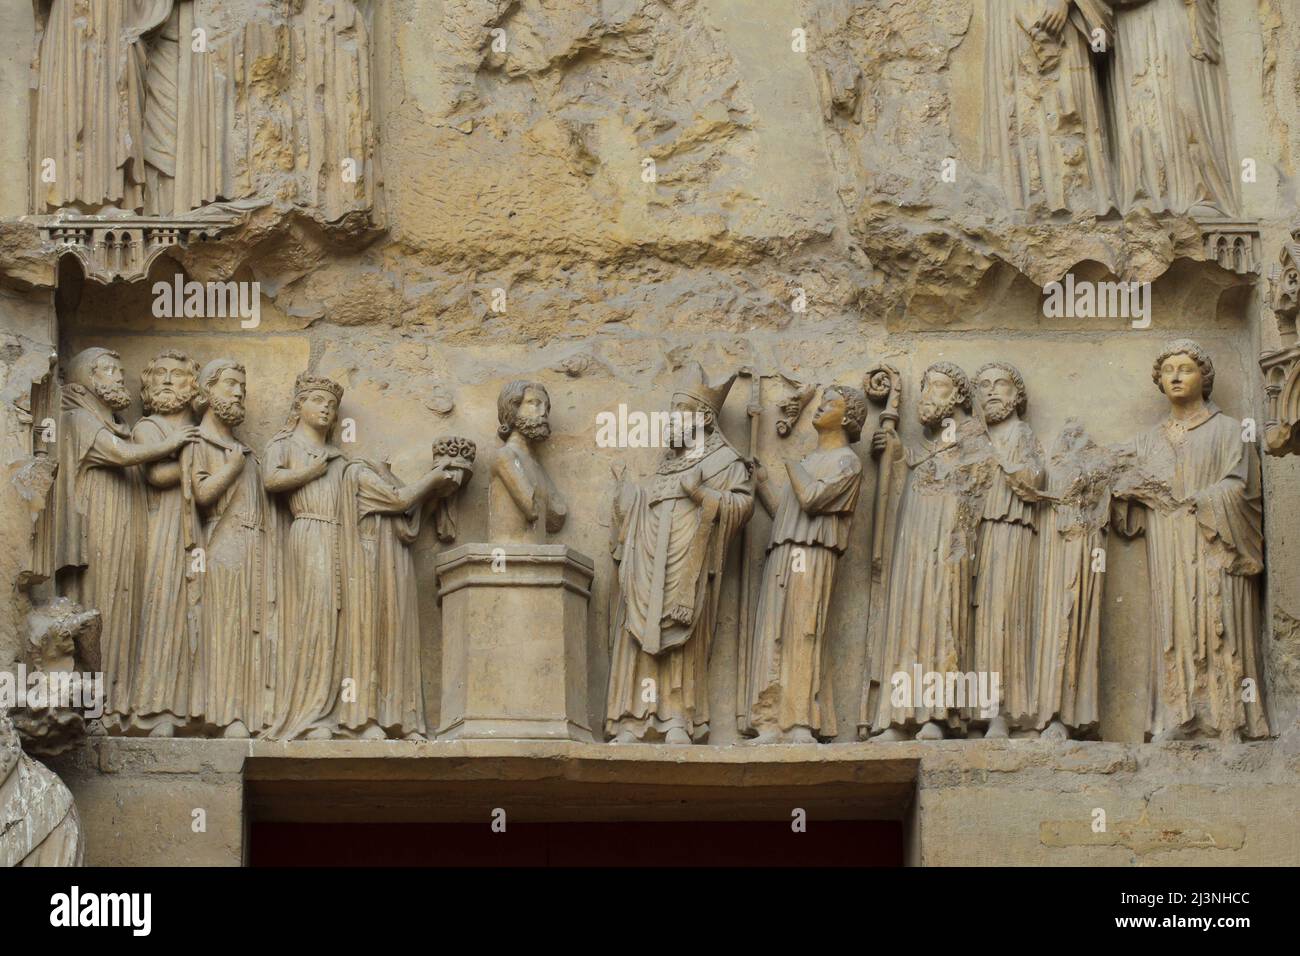 Baptism of King Clovis I by Saint Remigius of Reims depicted in the tympanum of the central portal of the north facade of the Reims Cathedral (Cathédrale Notre-Dame de Reims) in Reims, France. Stock Photo